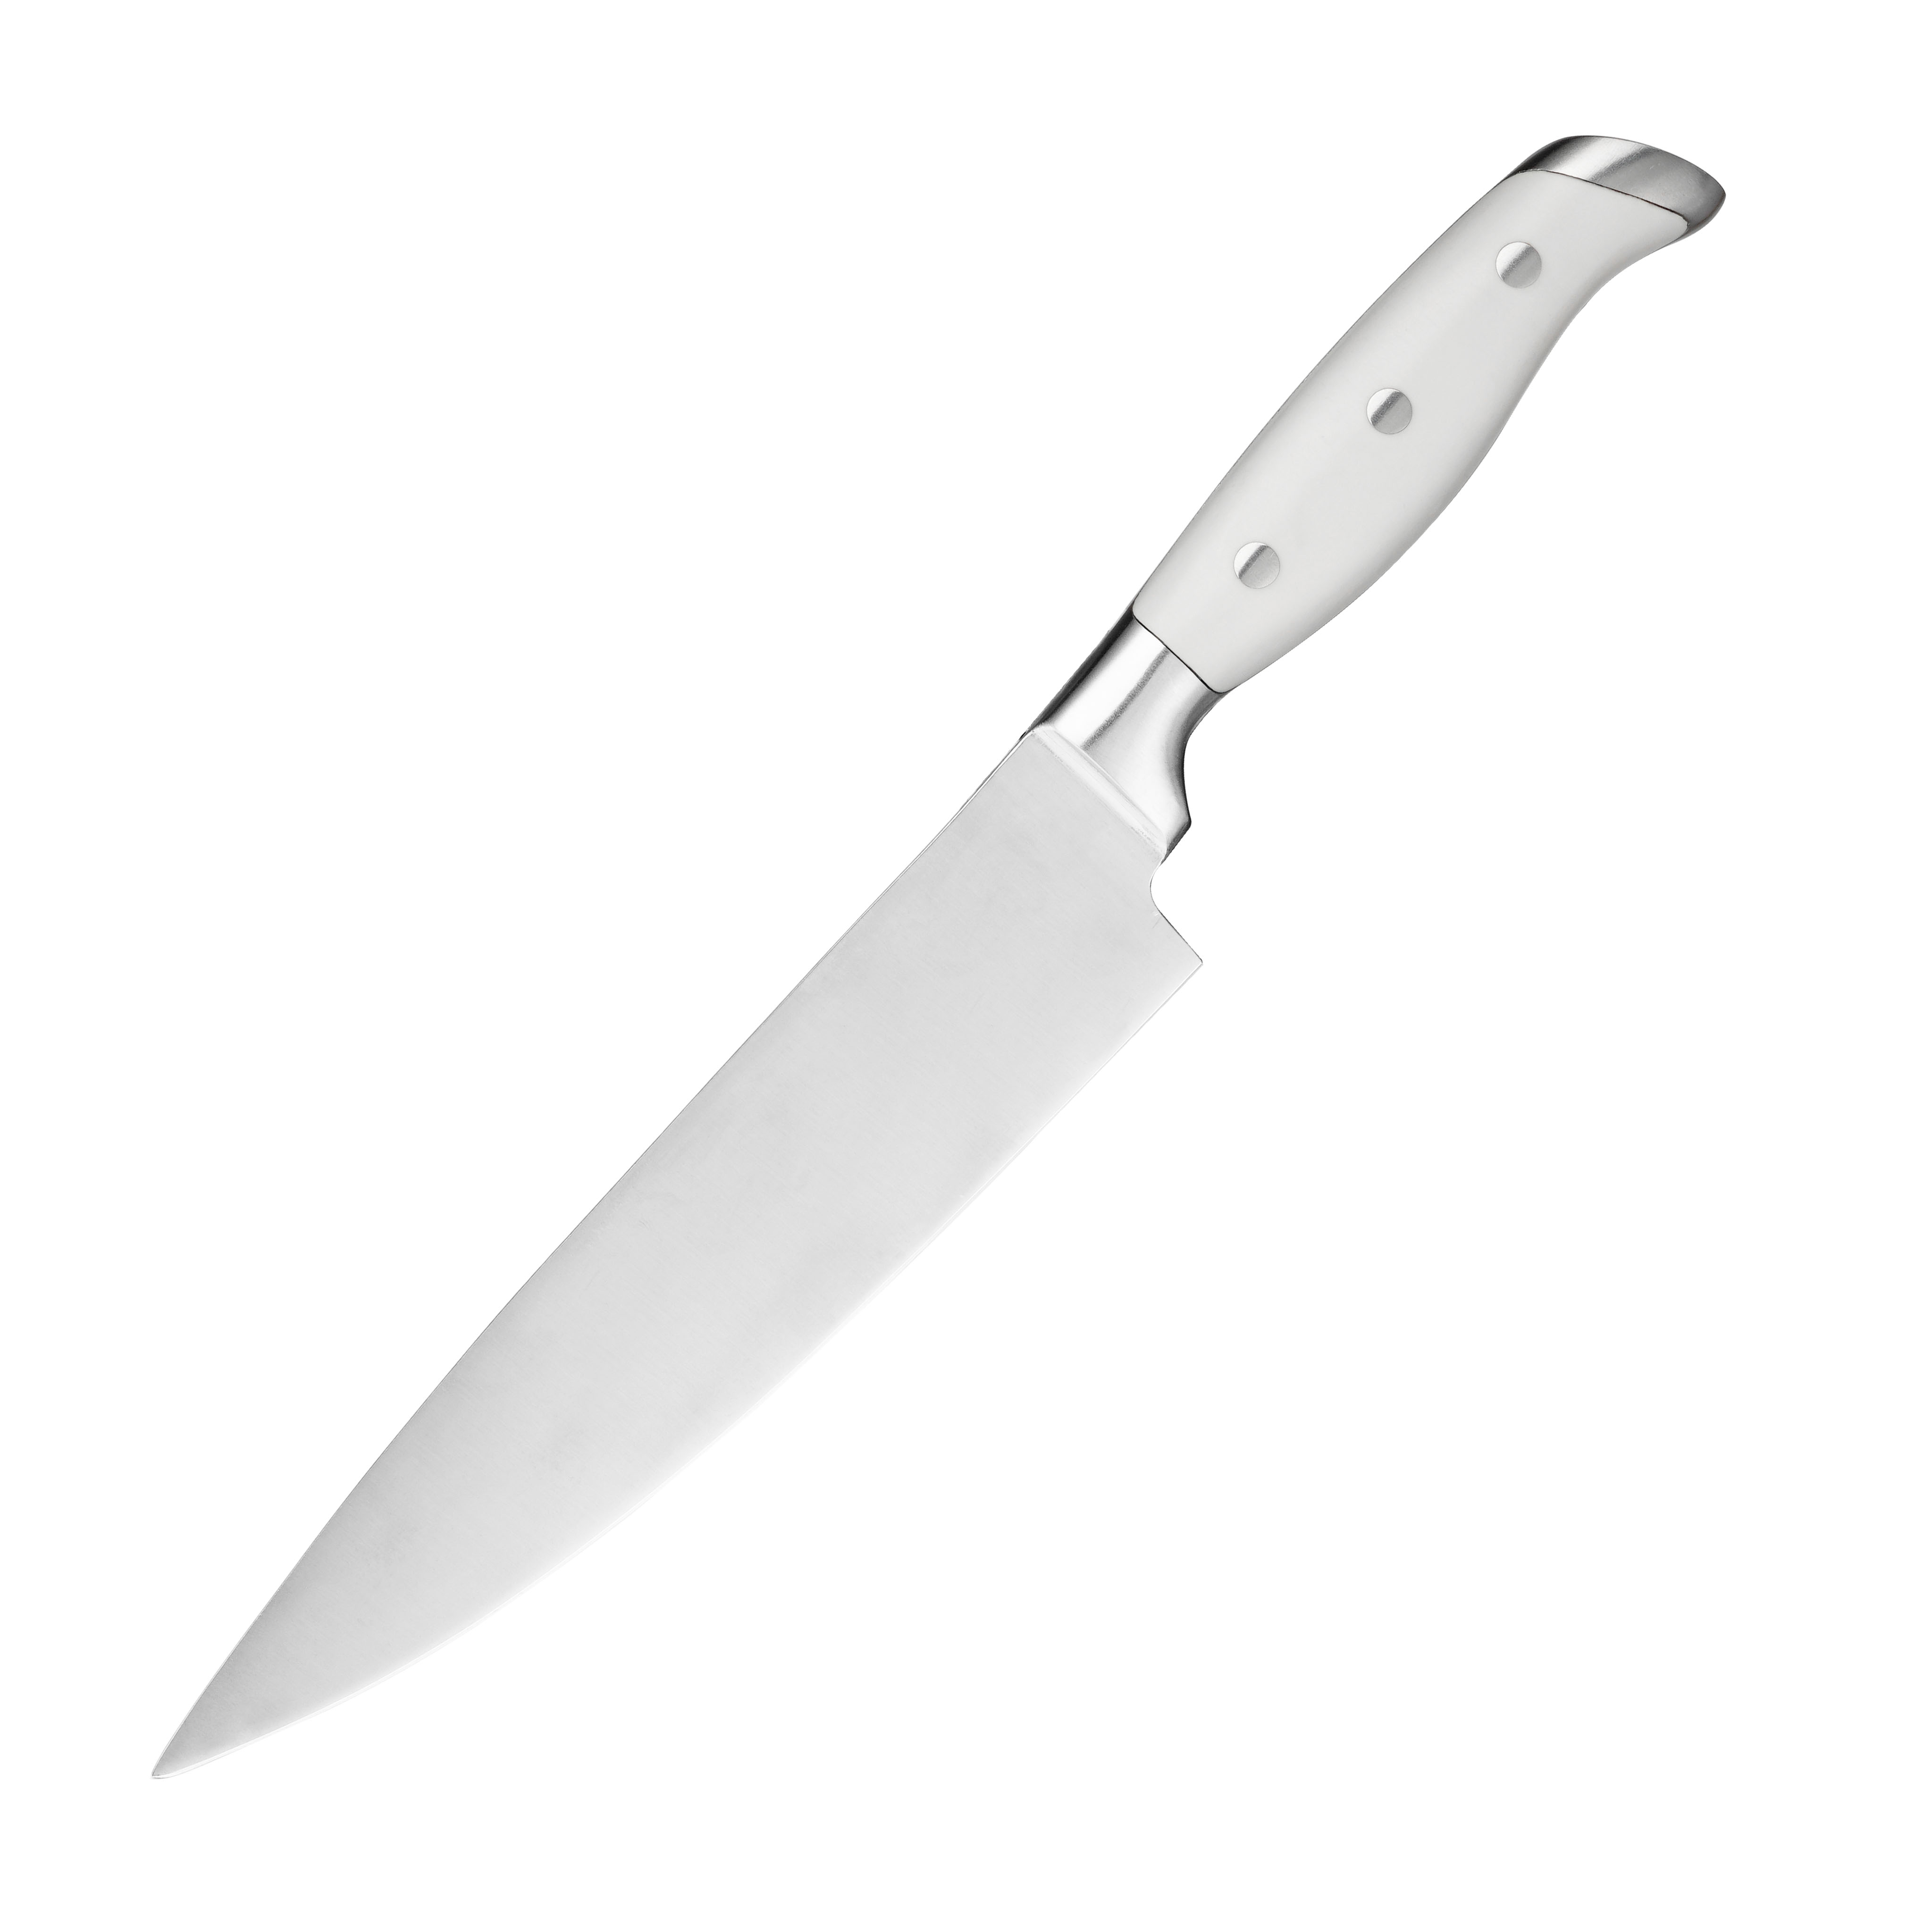 Jourmet 8-inch Chef Knife featuring a high carbon stainless steel blade and white triple-rivet handle, ideal for various culinary tasks.